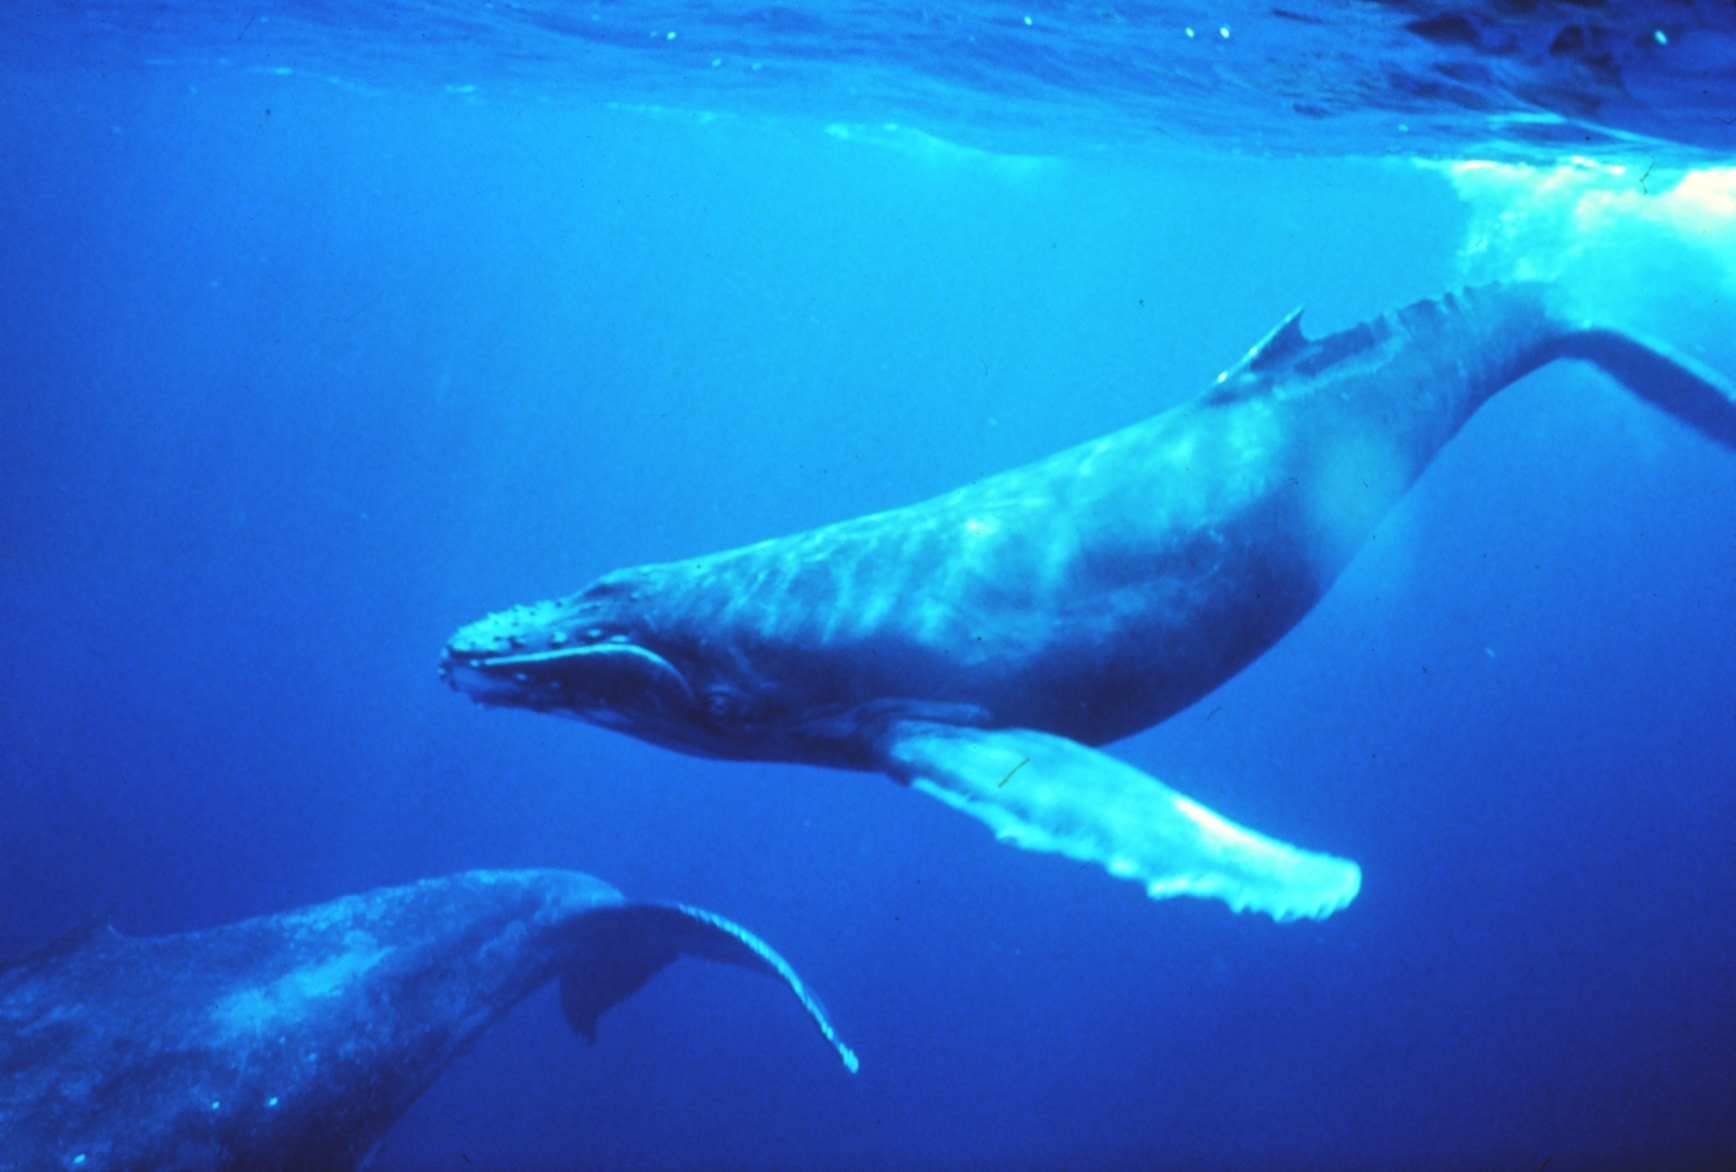 Humpback_whales_in_singing_position.jpg